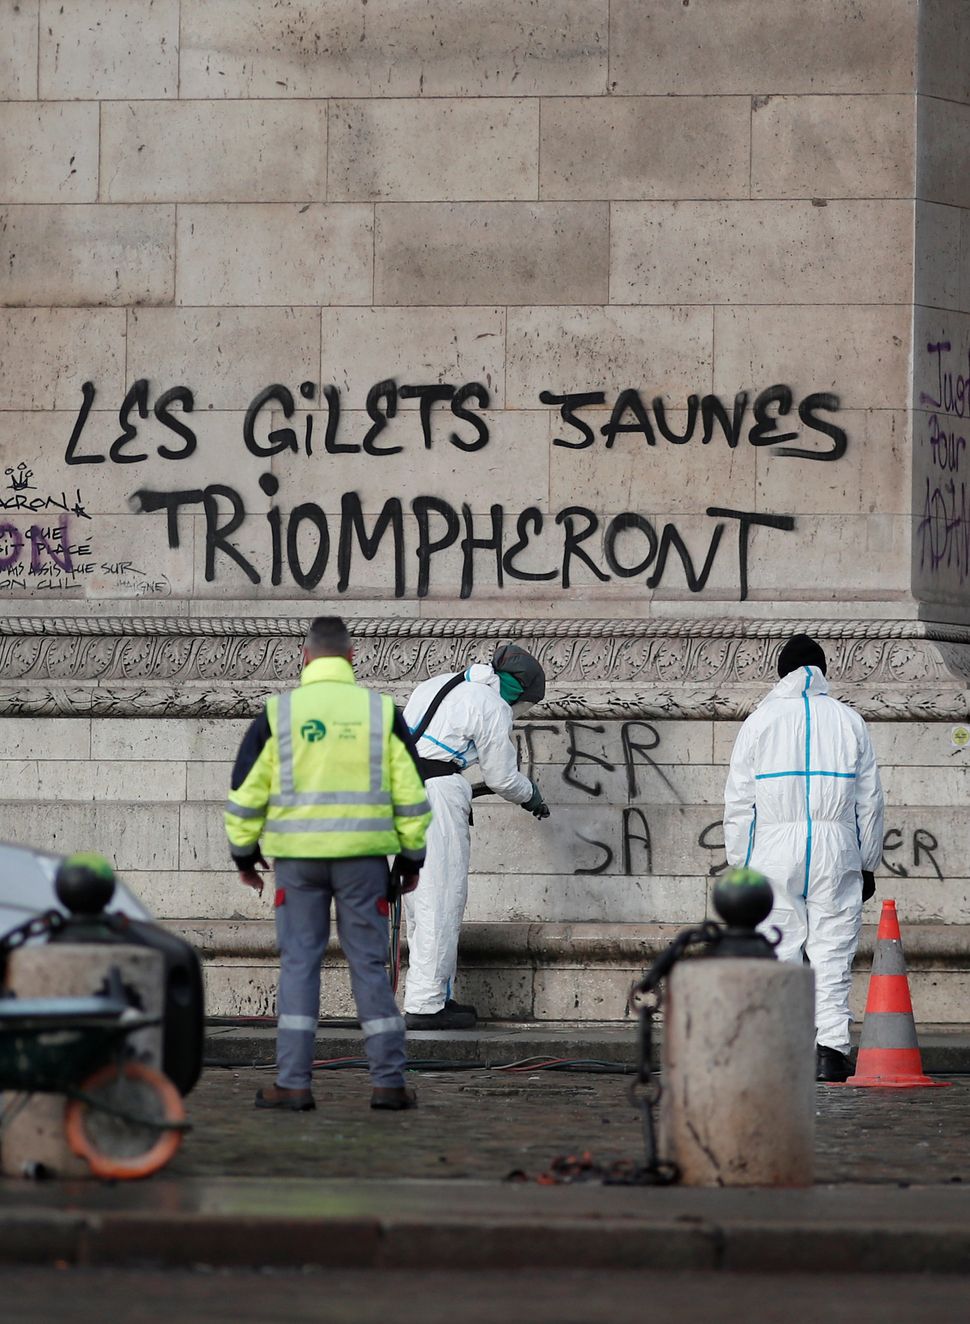 Professional cleaners begin to scrub graffiti from a monument in central Paris on Sunday.